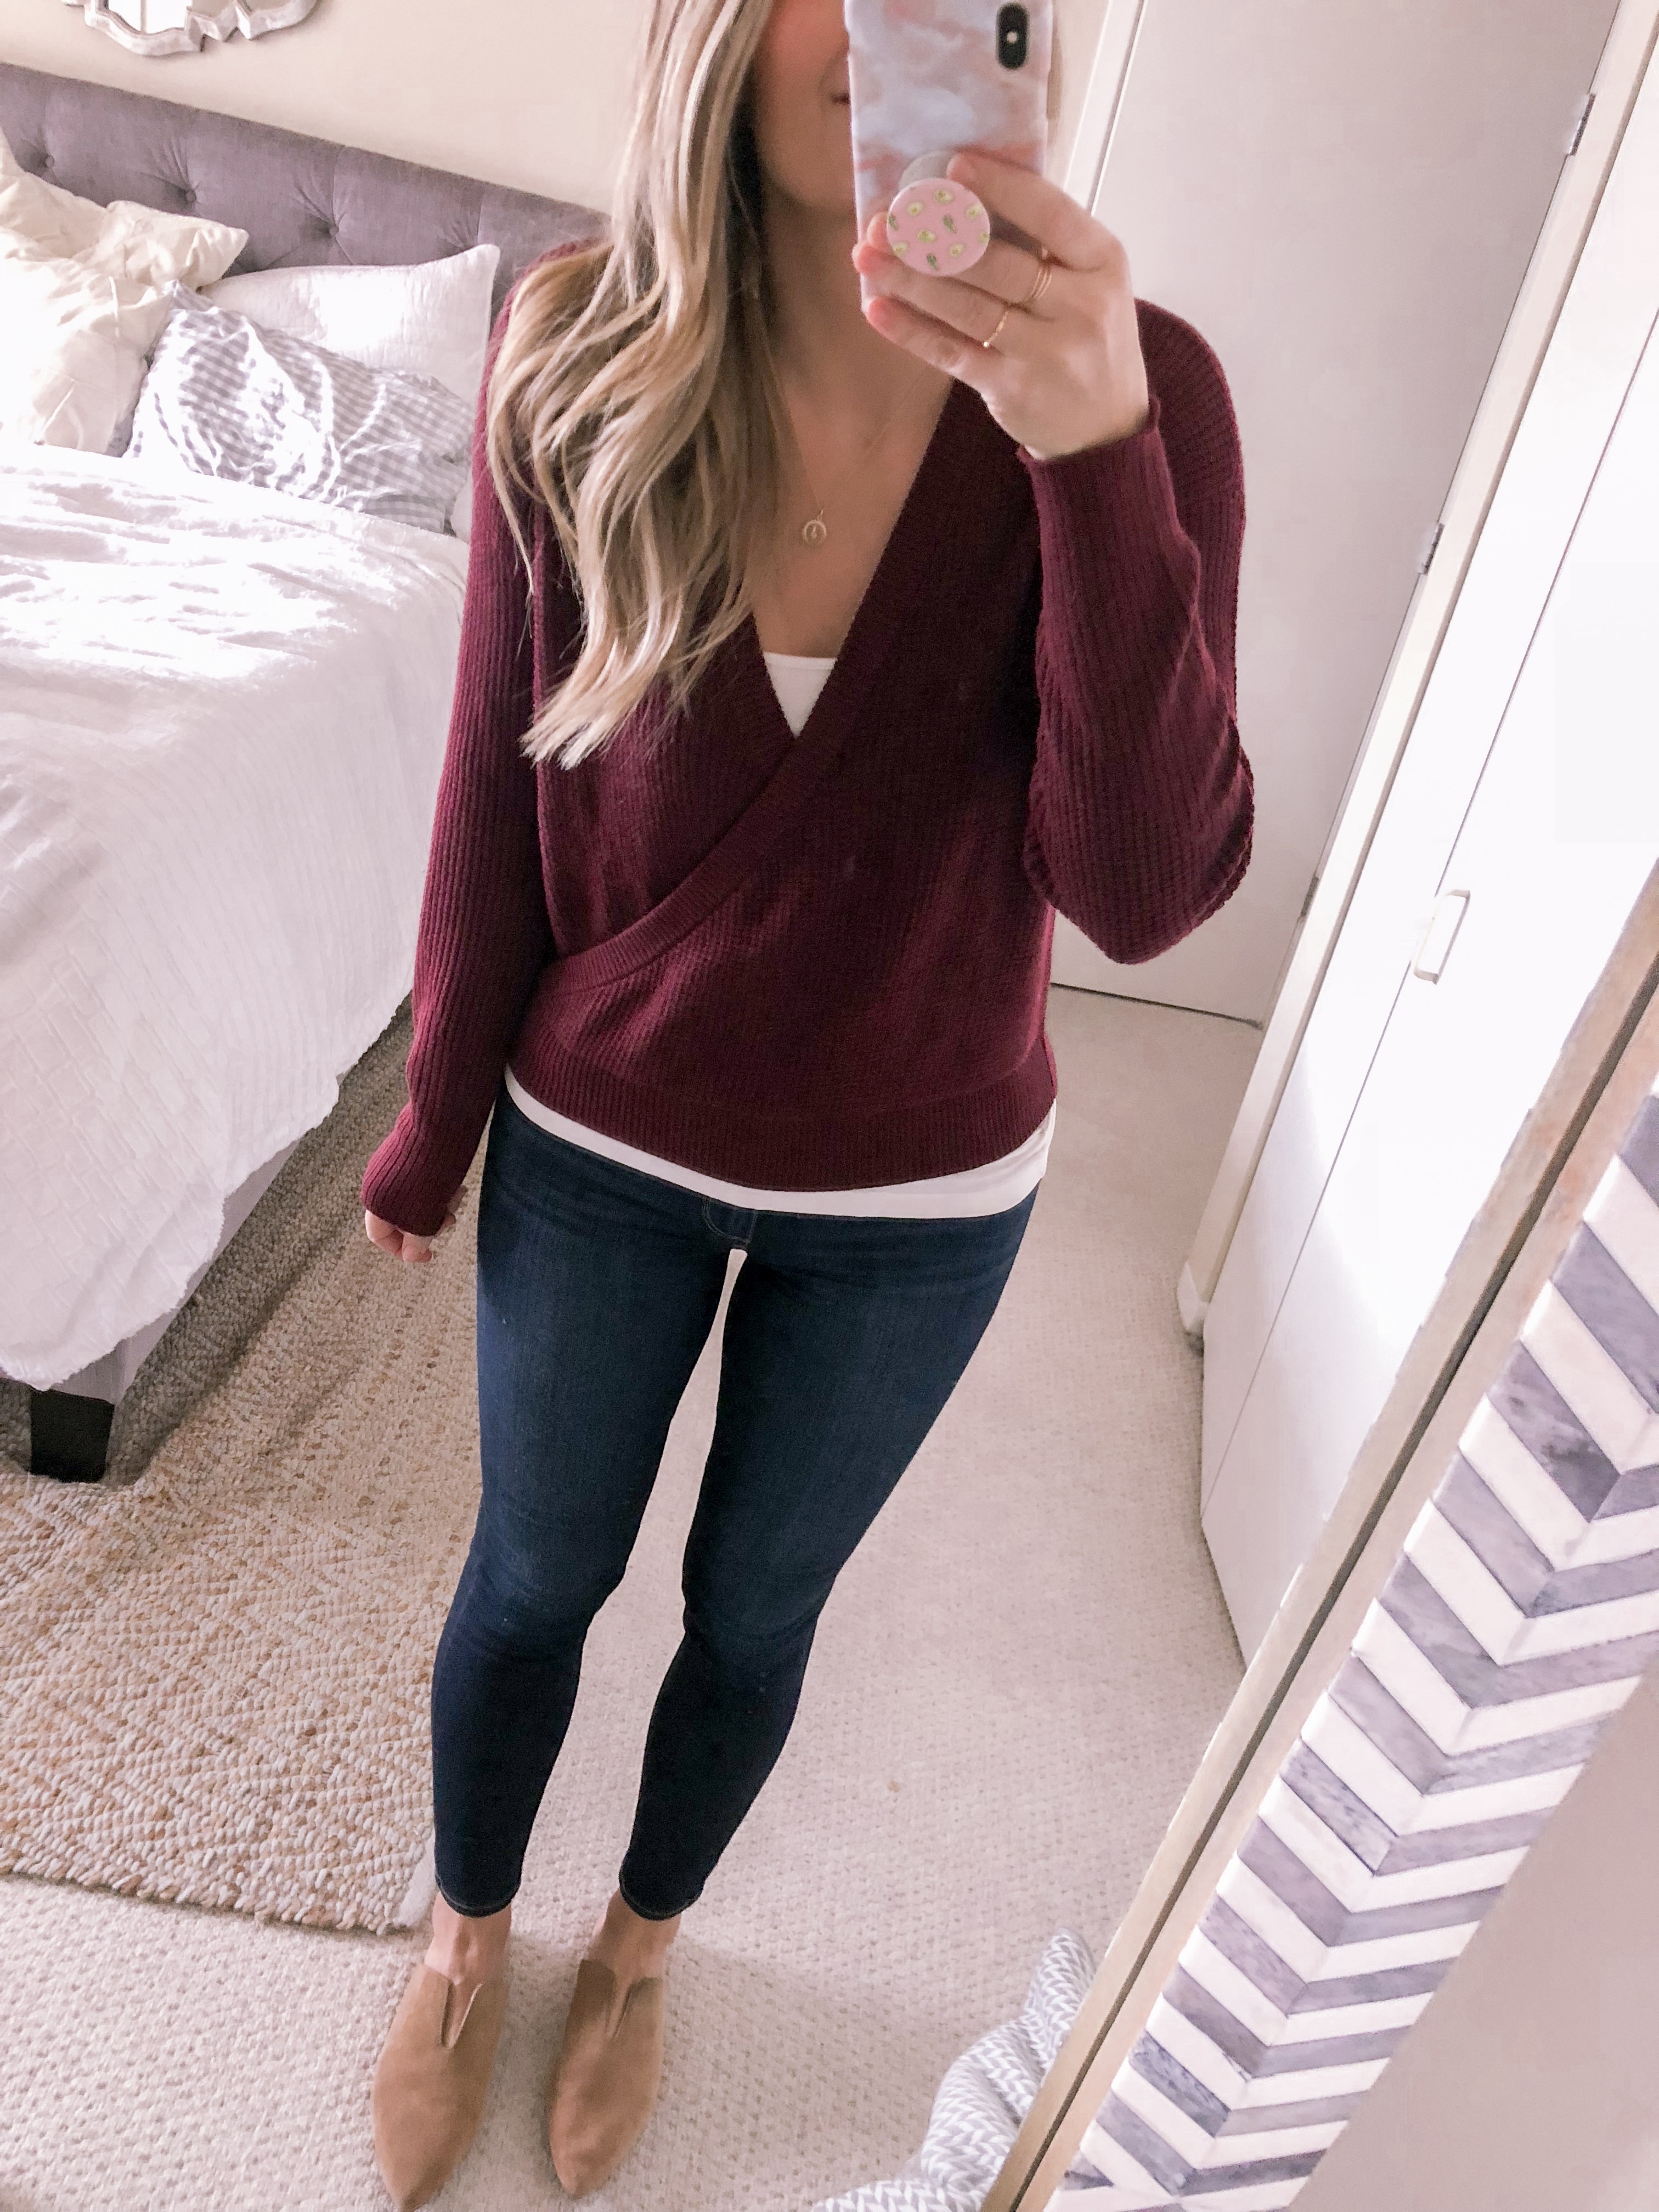 Jenna Colgrove styles a burgundy wrap sweater for the office as a work outfit idea for fall.